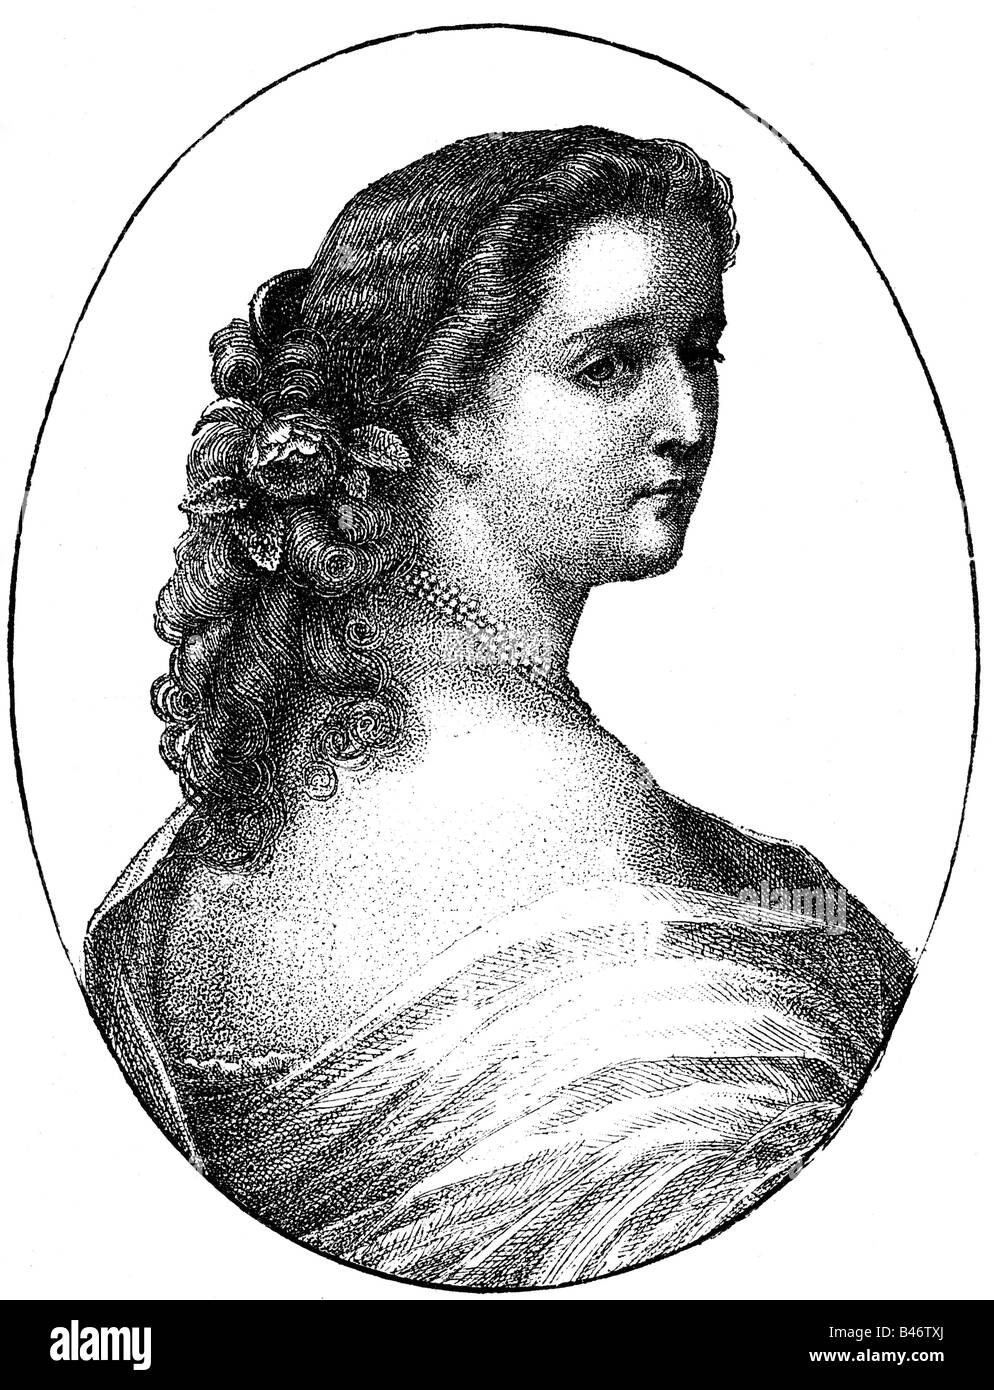 Eugenie, 5.5.1826 - 11.7.1920, Empress Consort of France 30.1.1853 - 4.9.1870, half length, wood engraving after engraving by Metzmacher, 1860,  , Stock Photo